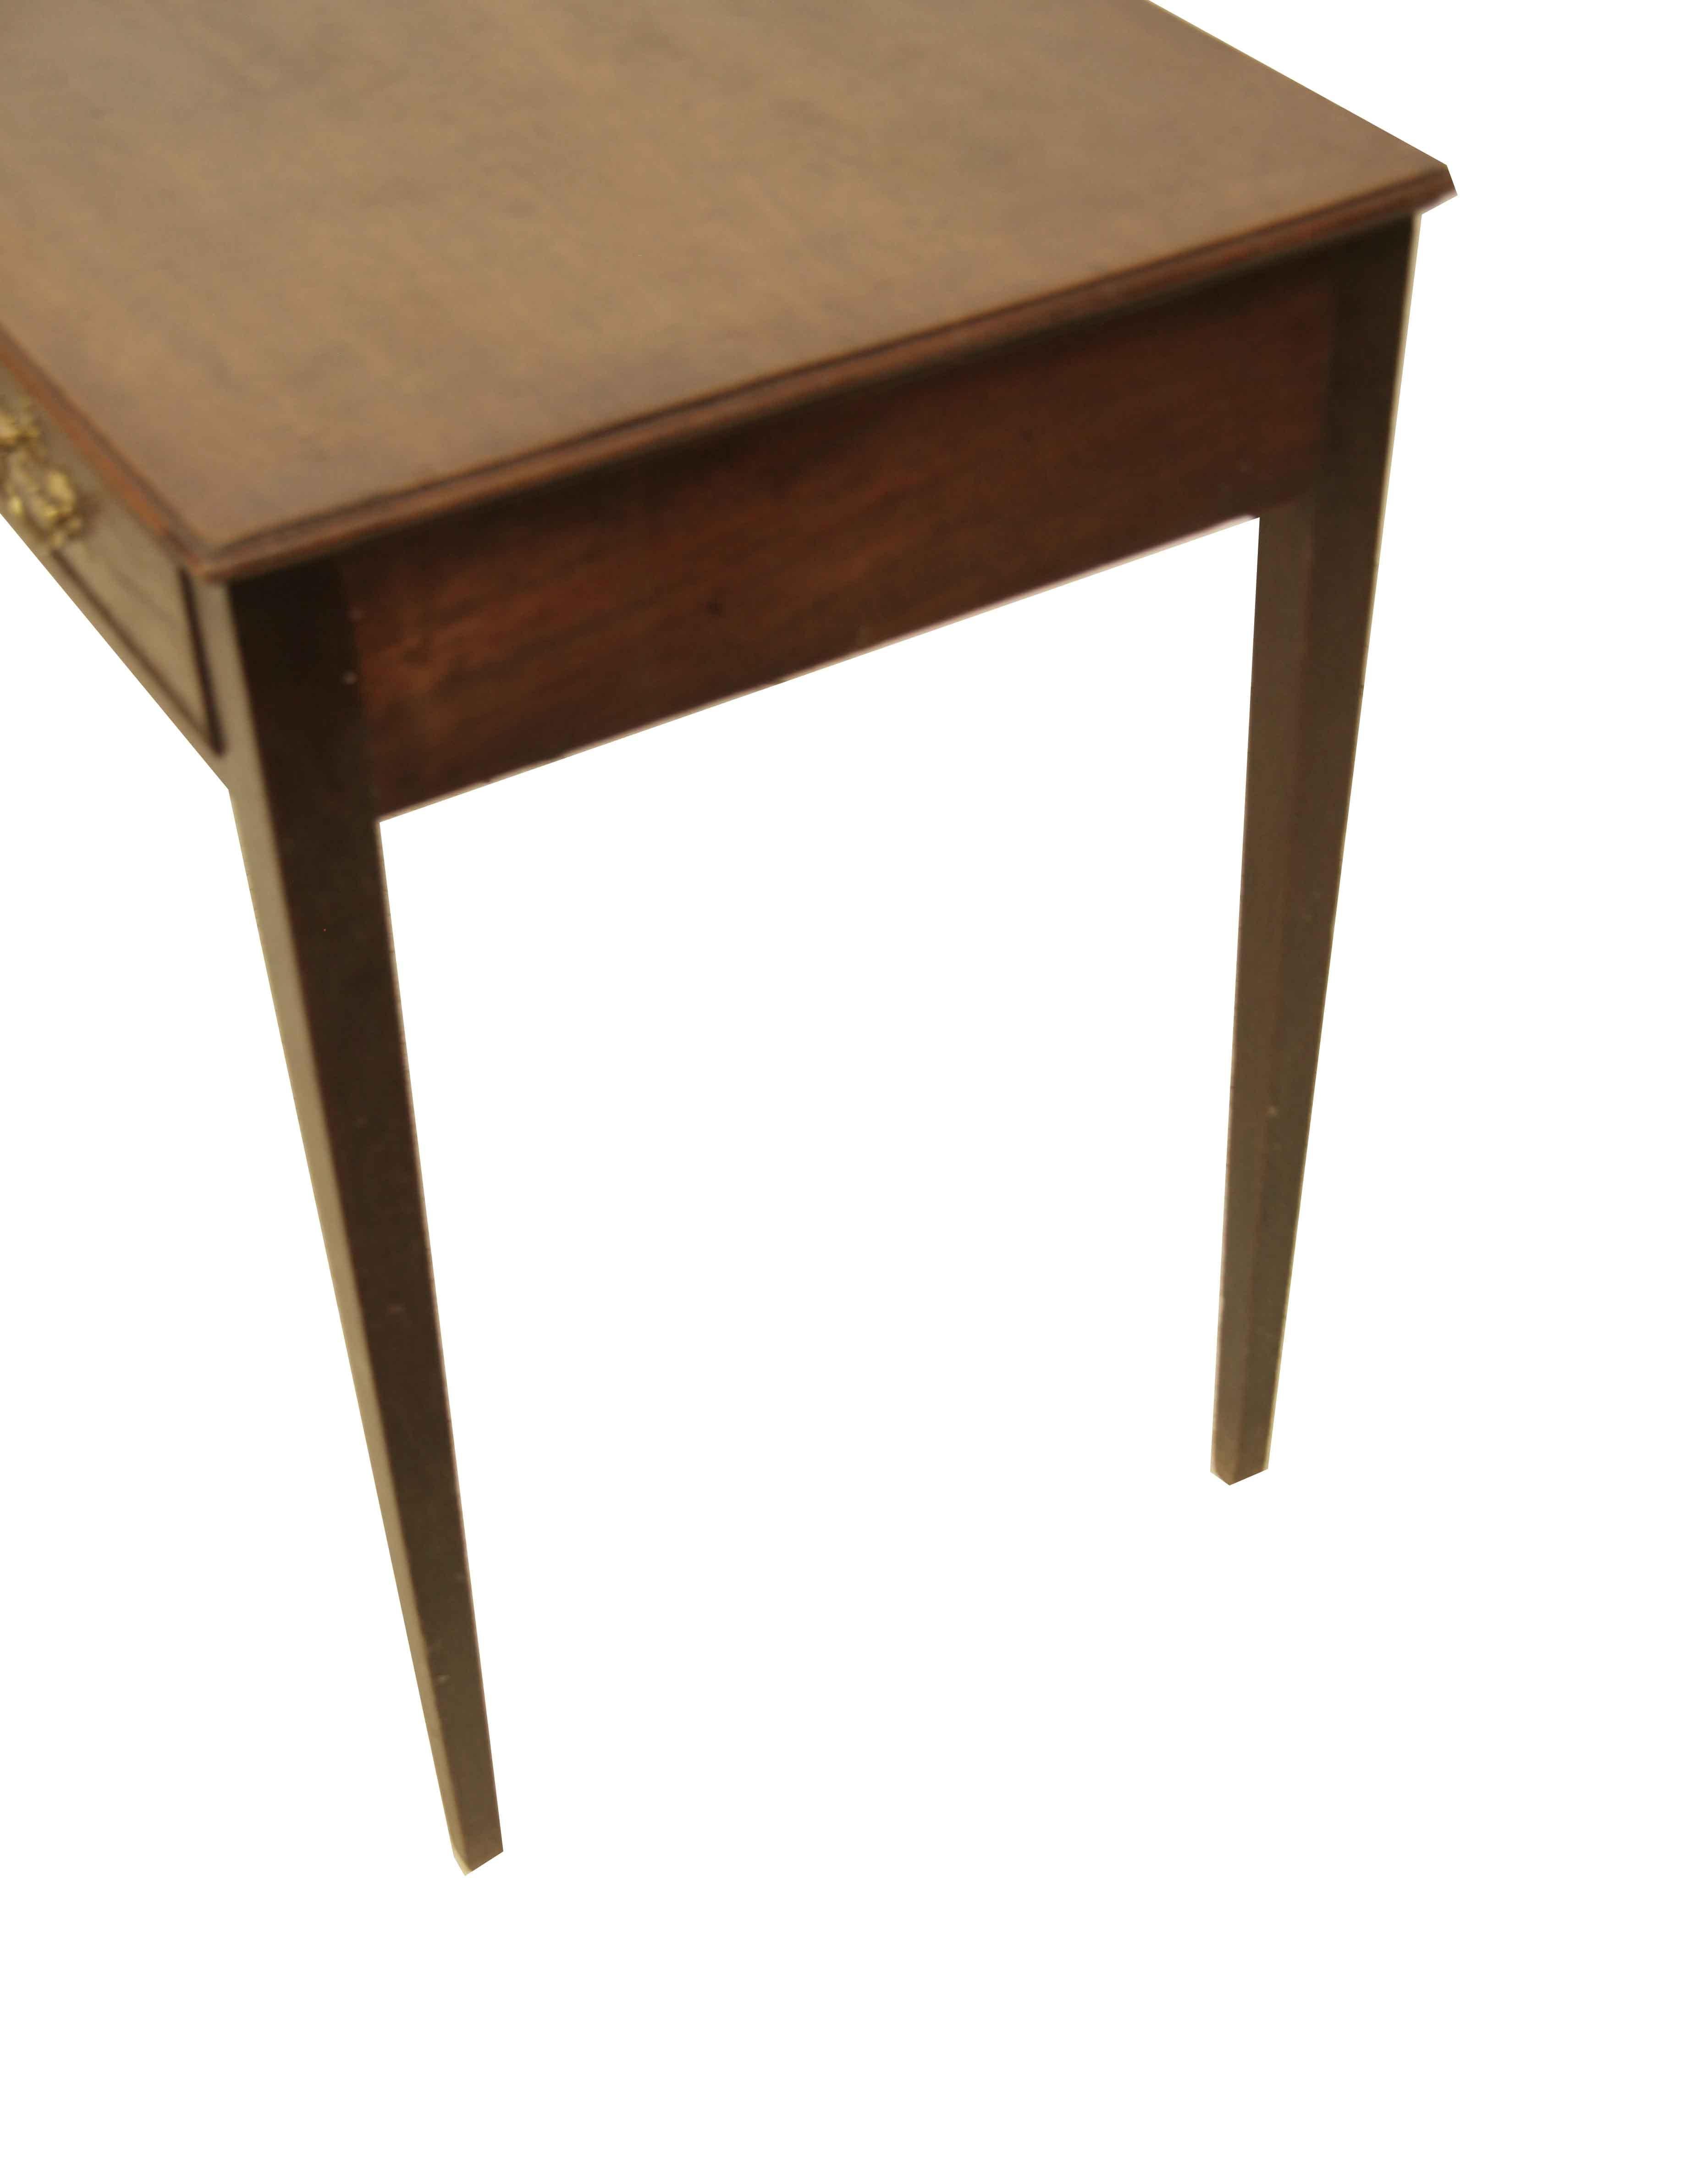 Anglais Table d'appoint George III en vente